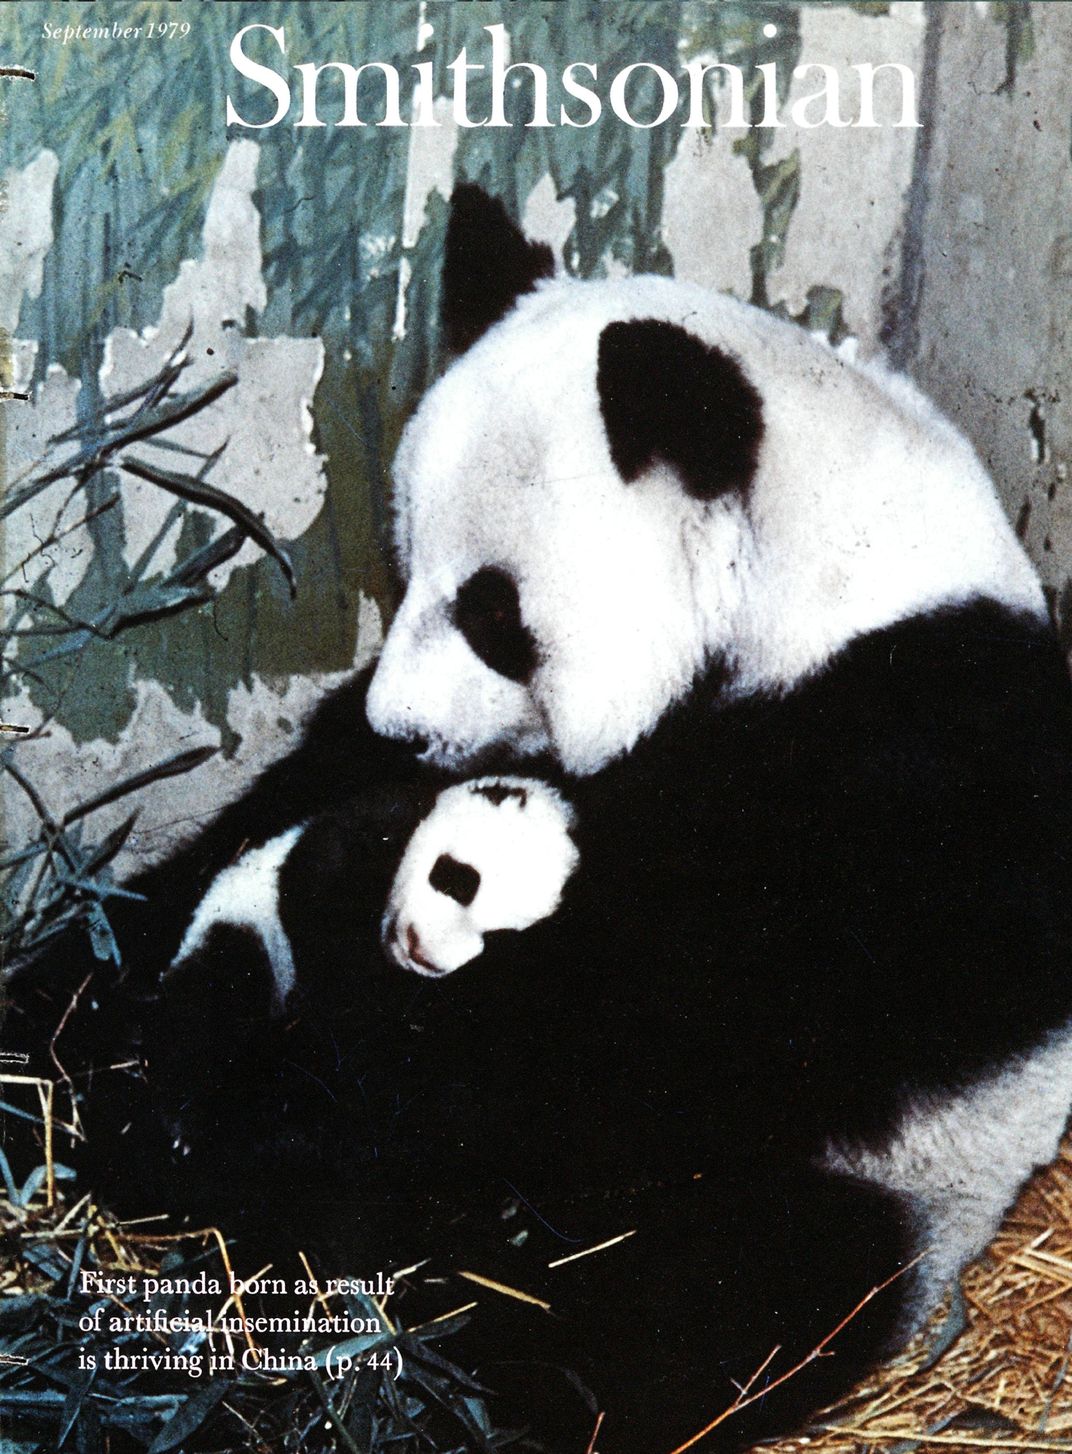 The September 1979 cover of Smithsonian magazine, featuring the first panda cub born through artificial insemination